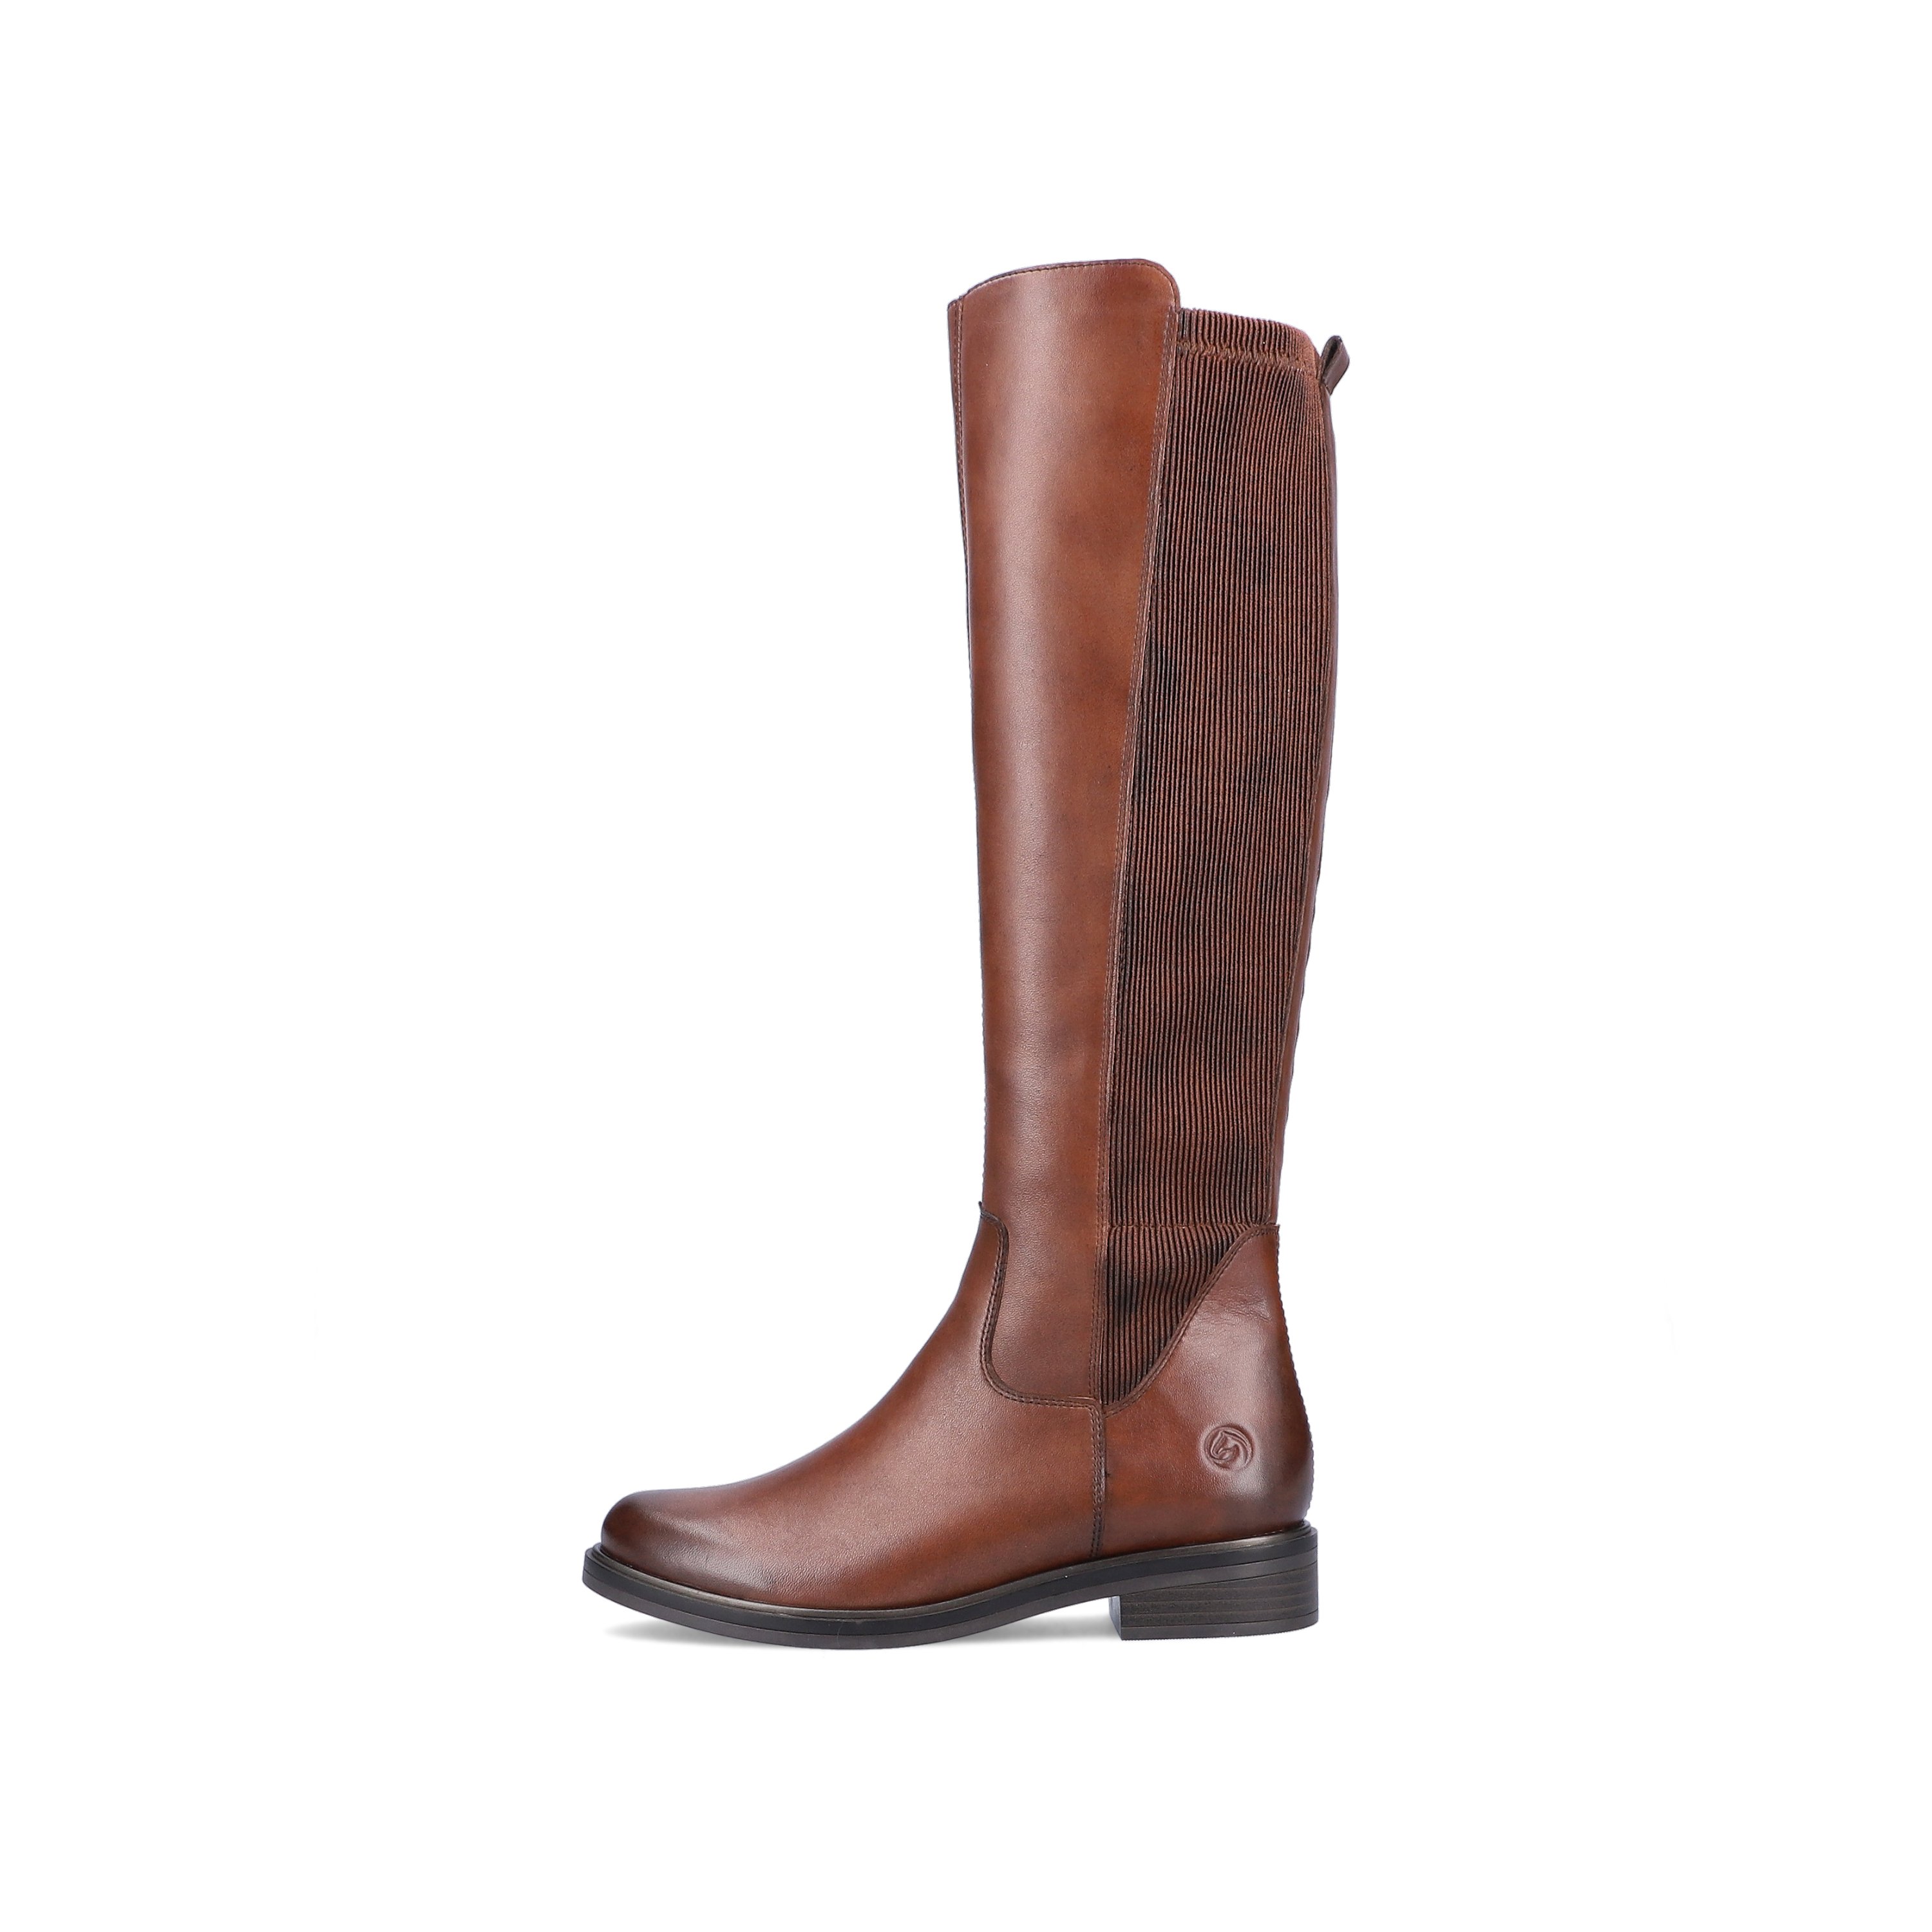 Hazel remonte women´s high boots D8371-25 with zipper as well as profile sole. The outside of the shoe